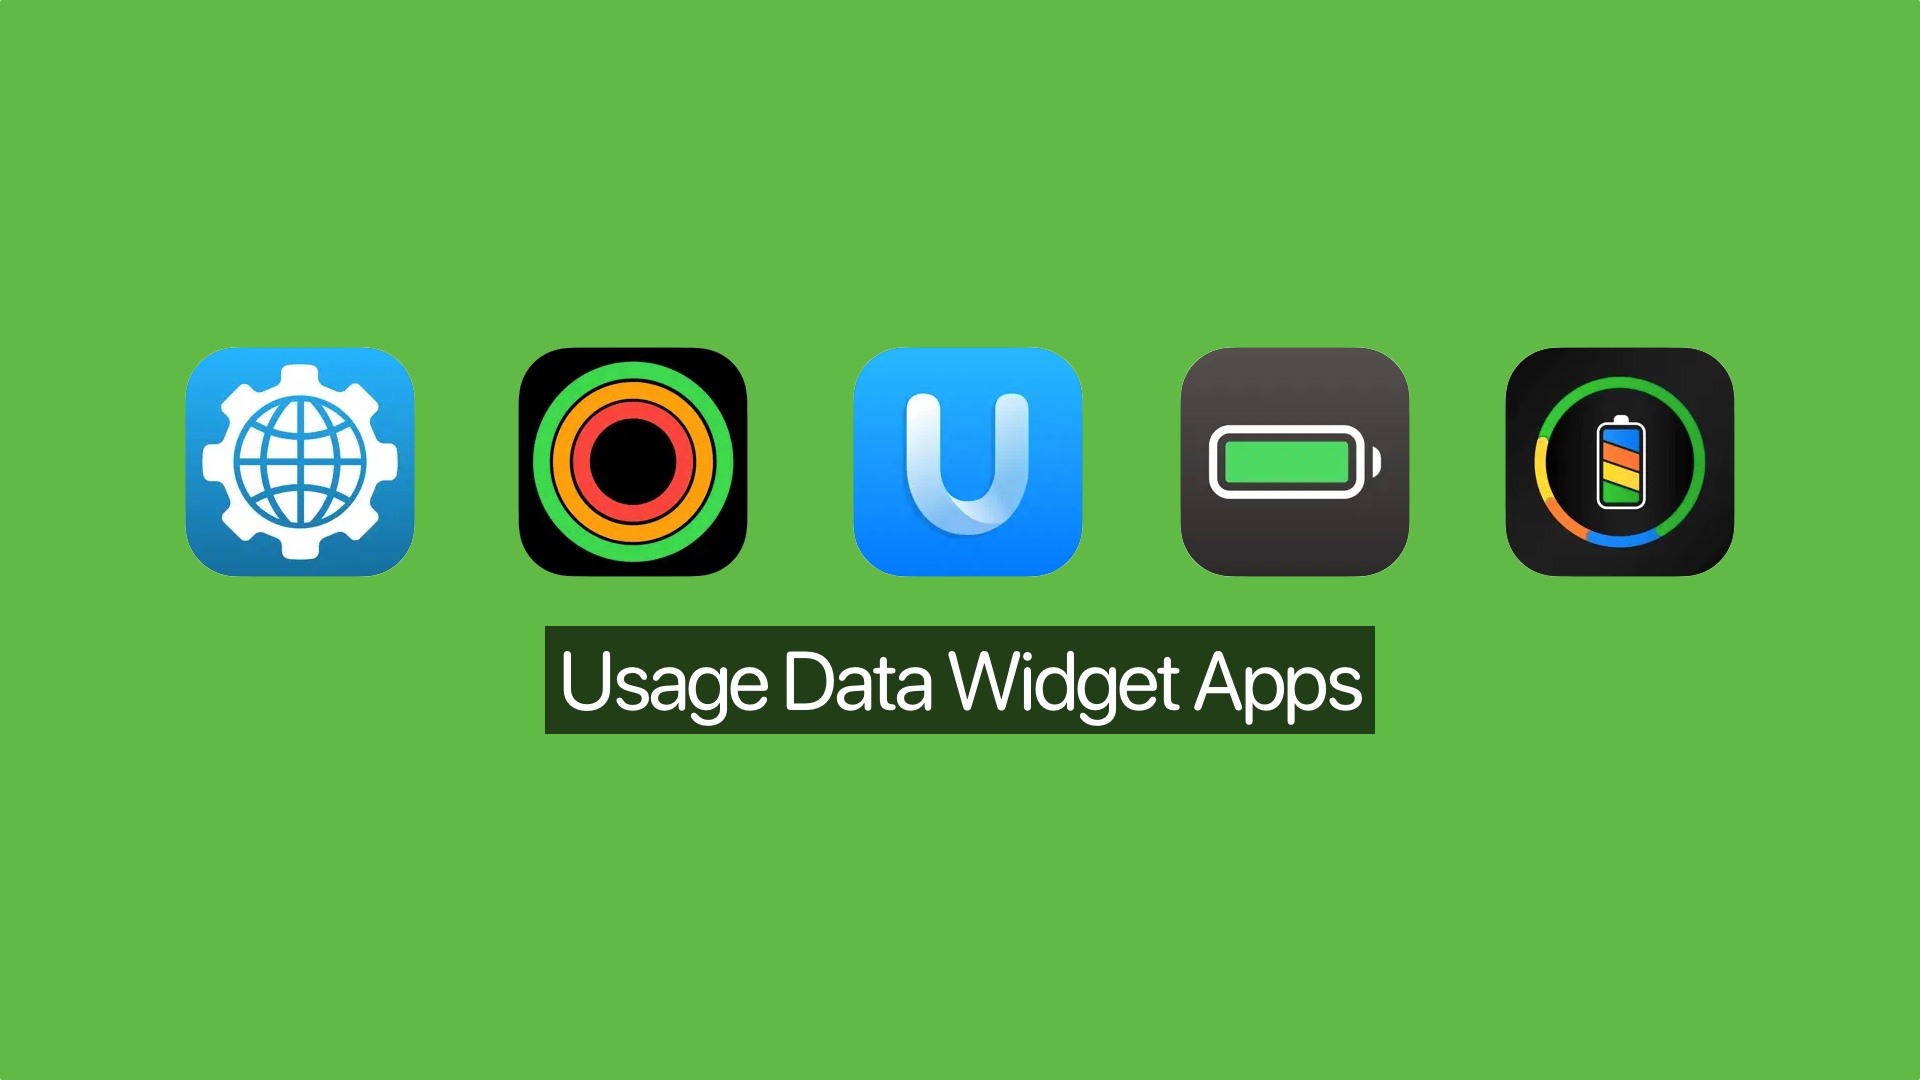 Best Widget Apps to Add Data Usage Stats On Home Screen – iOS Hacker